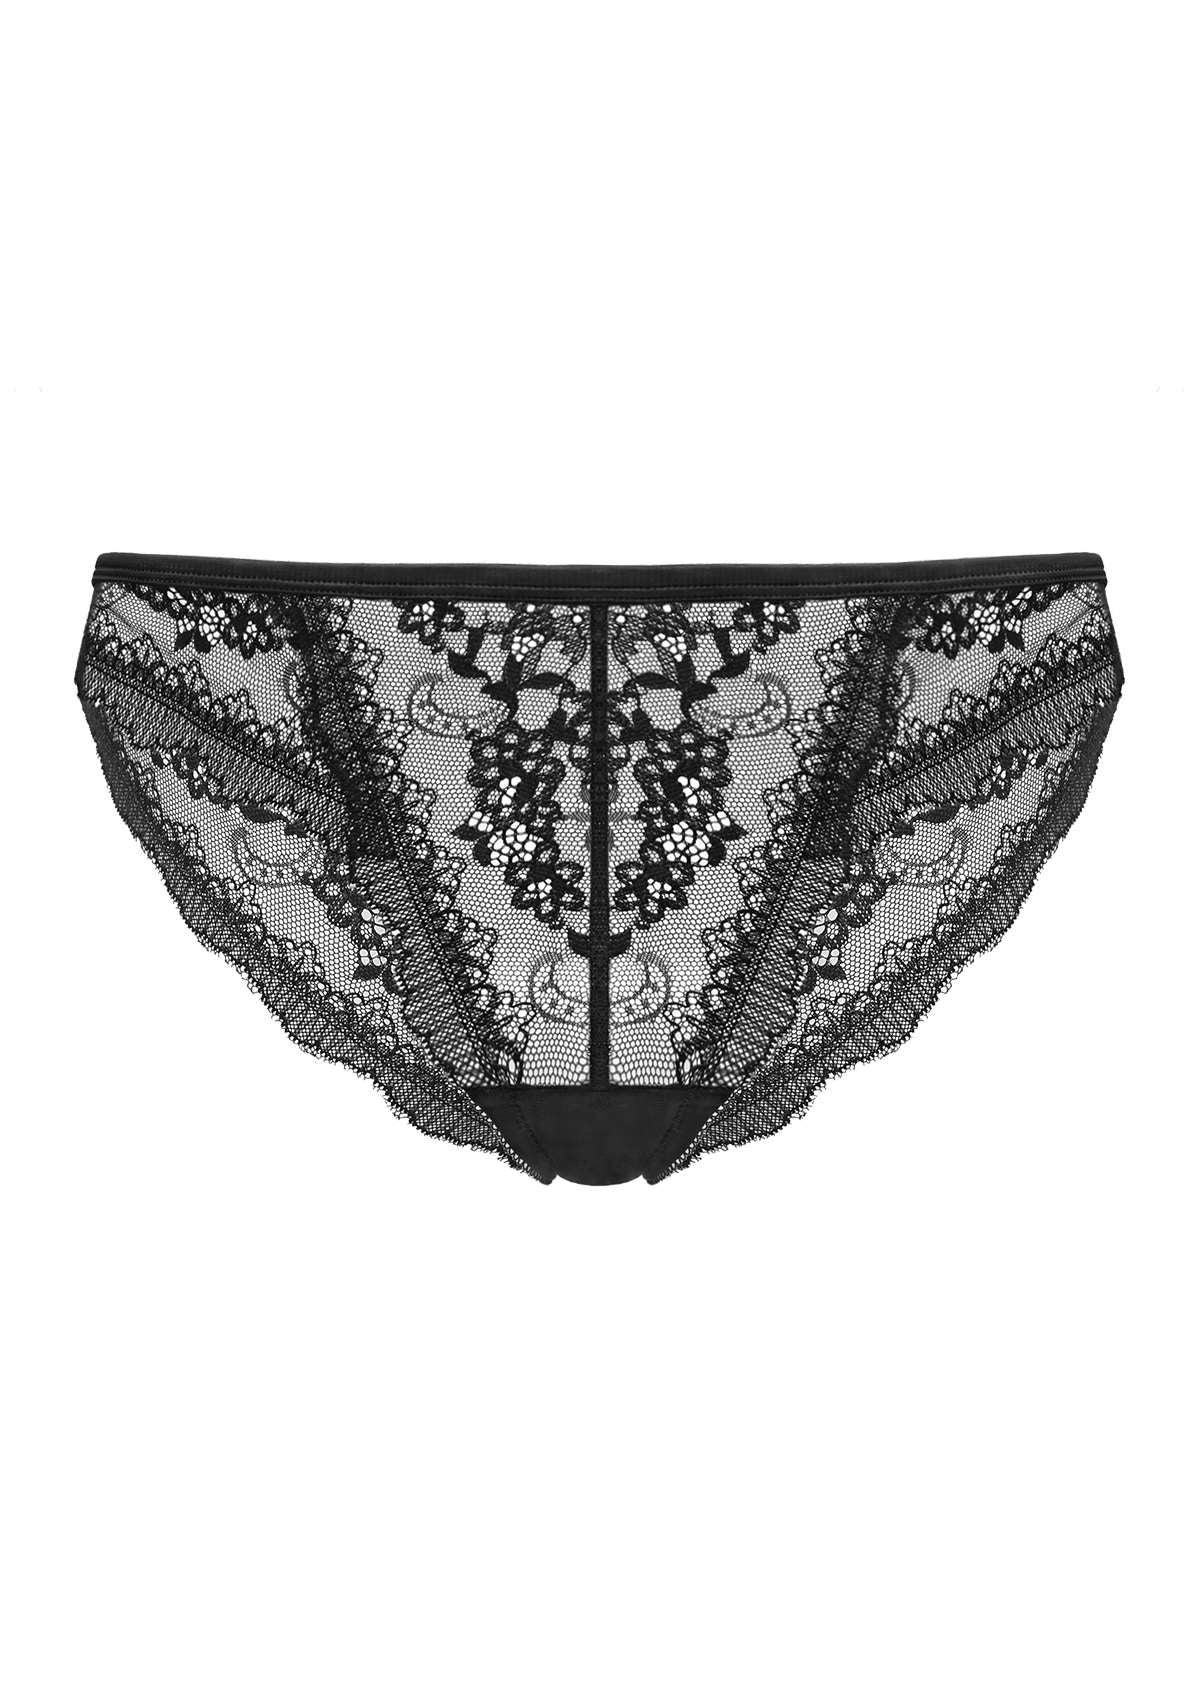 HSIA Floral Lace Bridal Cheeky Underwear: Delicate, Airy, And Comfy - Black / XXL